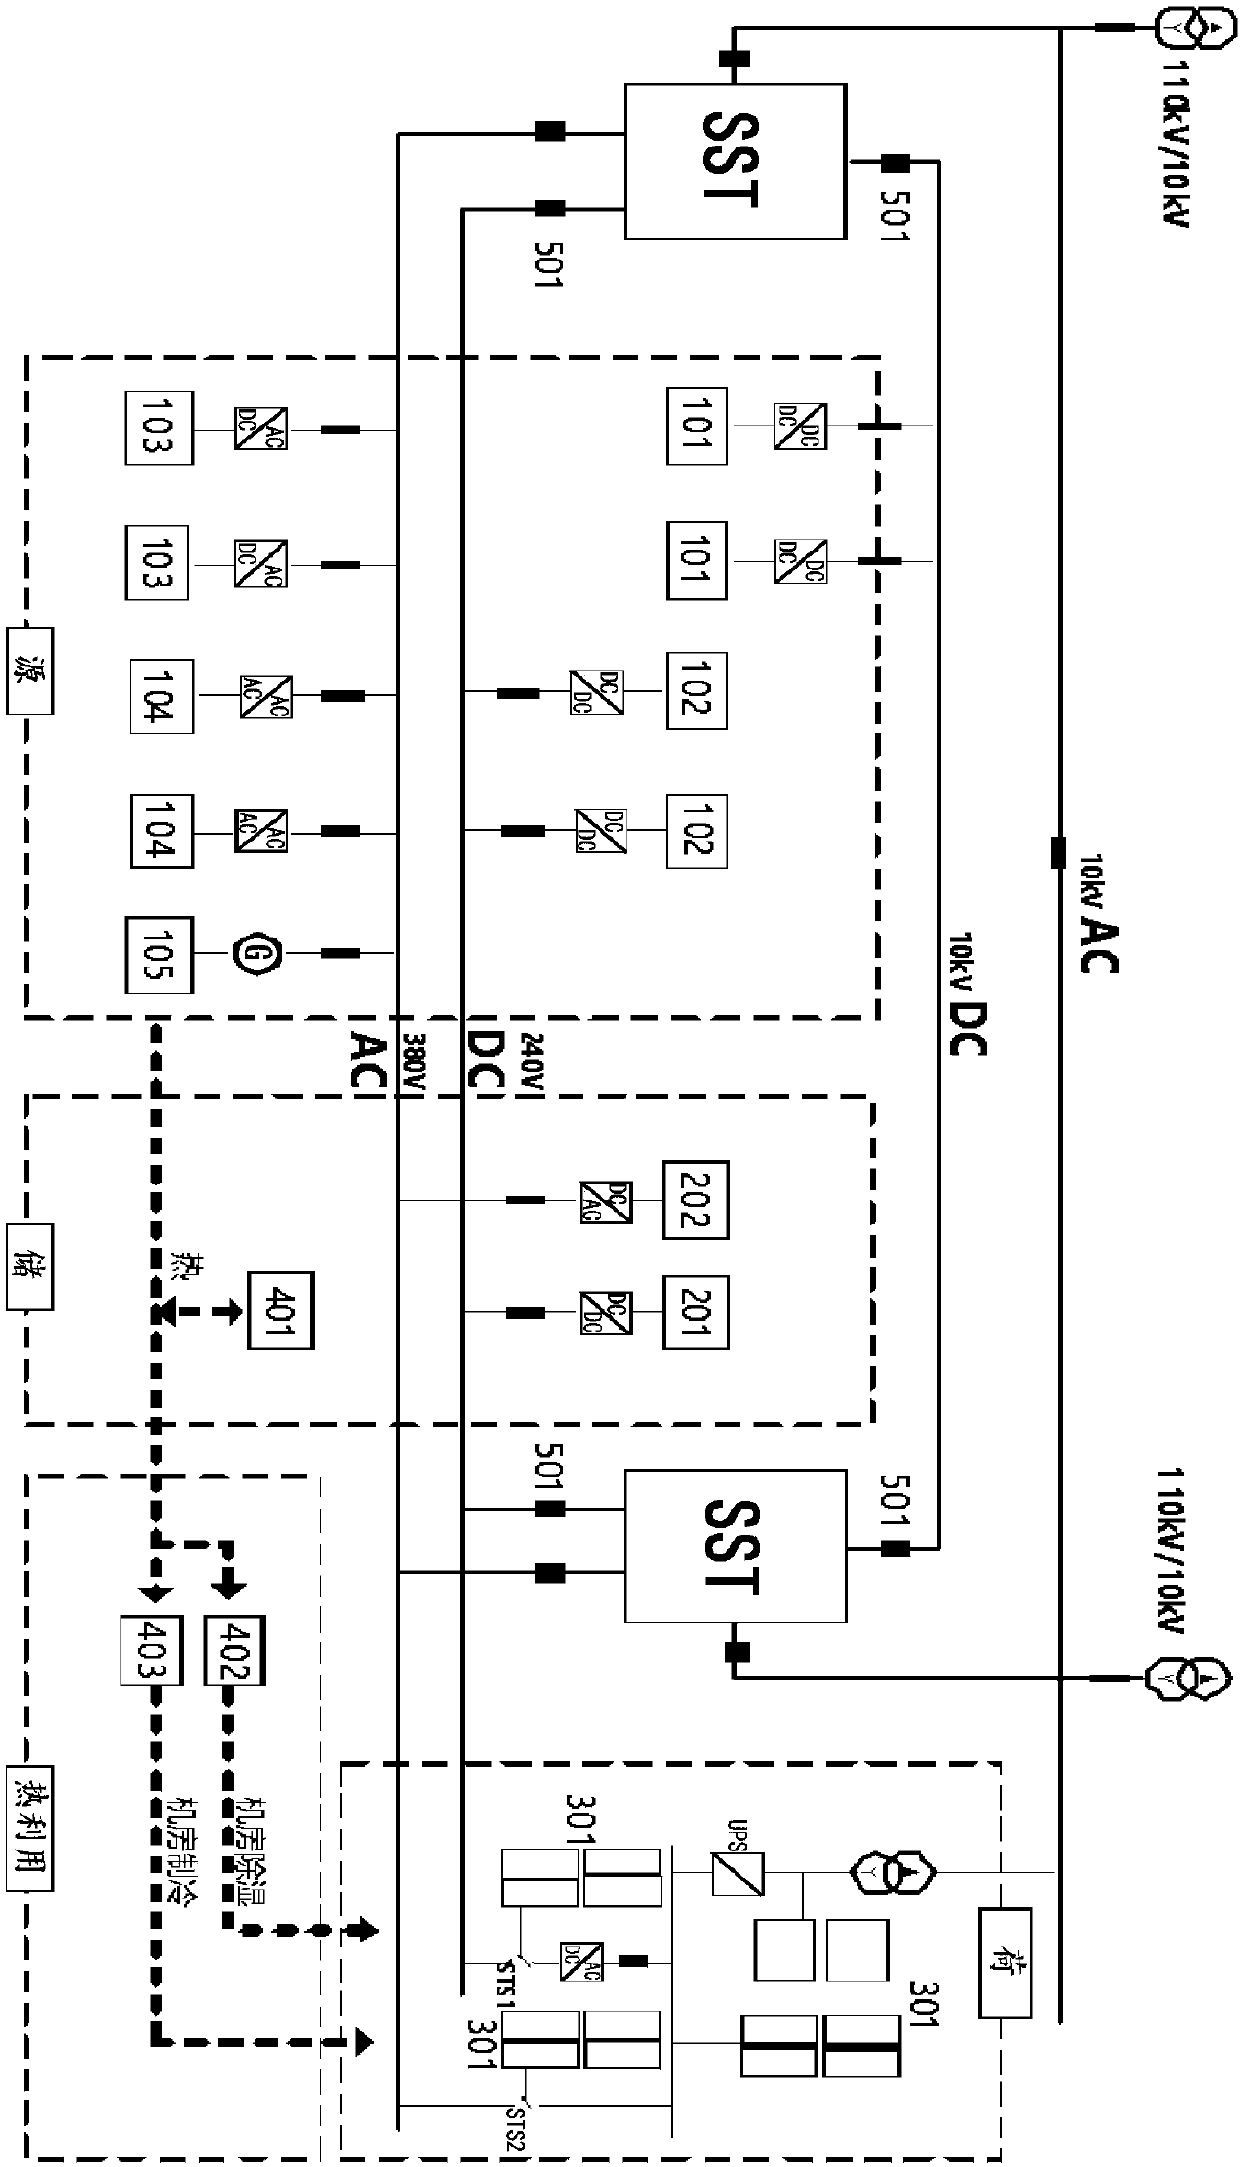 Double-redundant power electronic transformer based alternating-current and direct-current hybrid system